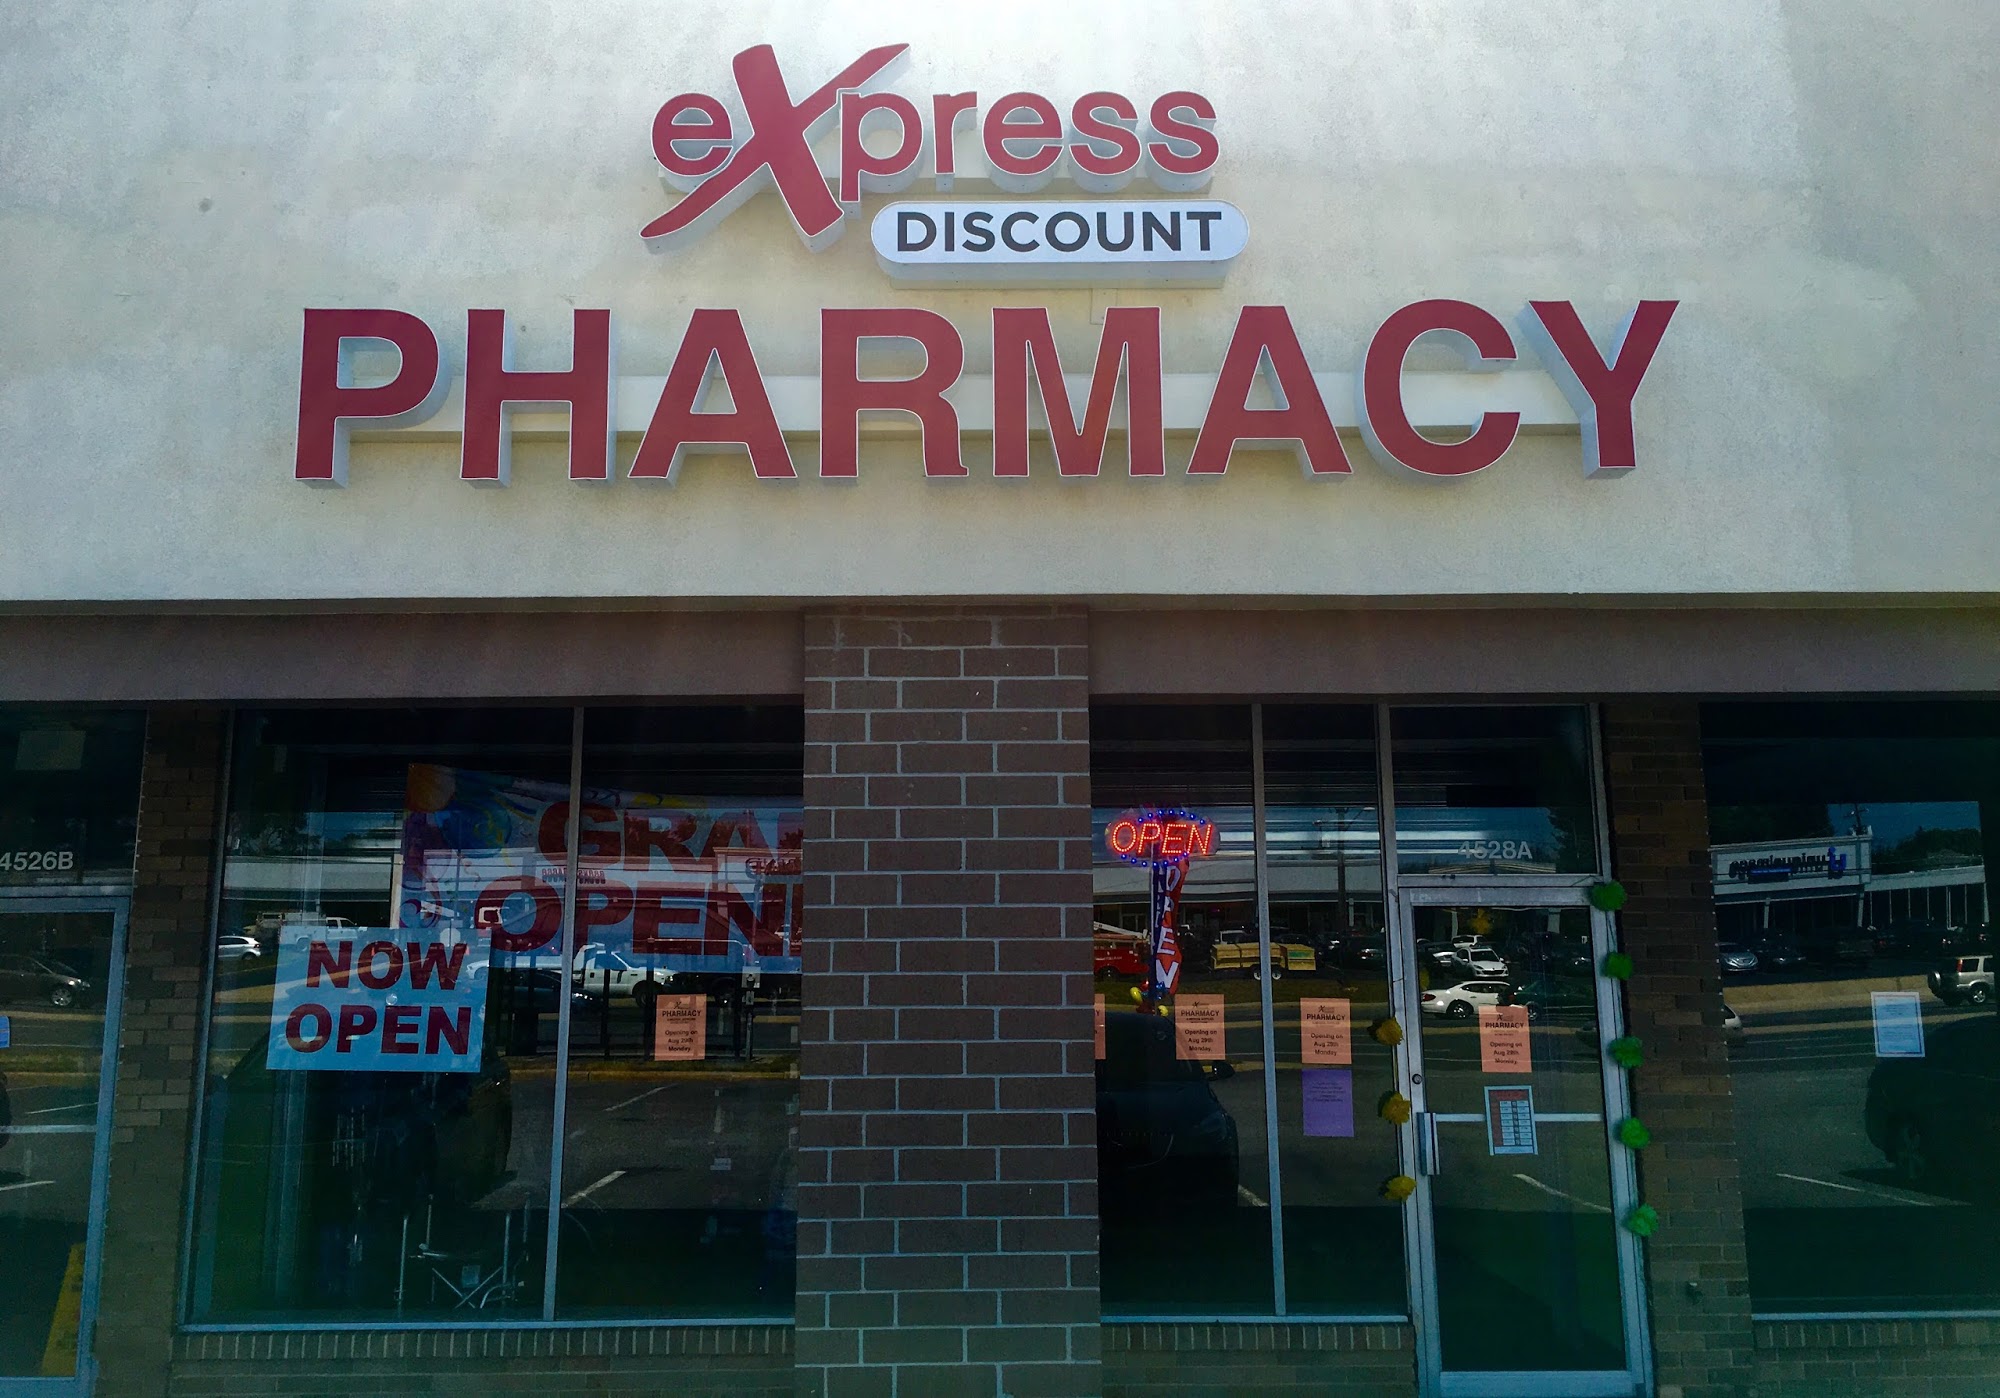 Express Discount Pharmacy